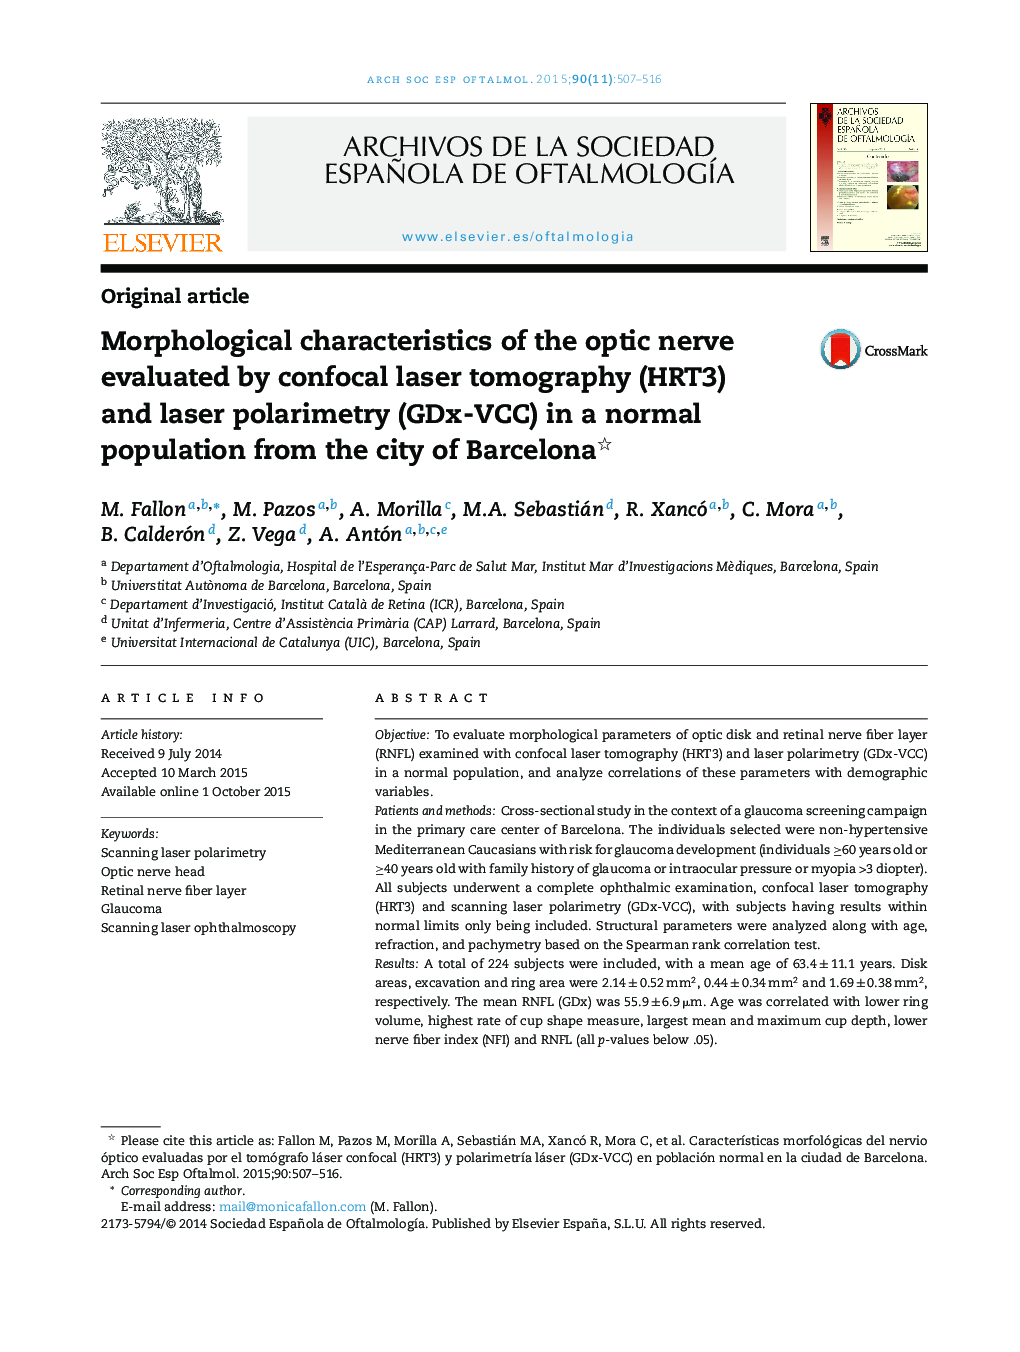 Morphological characteristics of the optic nerve evaluated by confocal laser tomography (HRT3) and laser polarimetry (GDx-VCC) in a normal population from the city of Barcelona